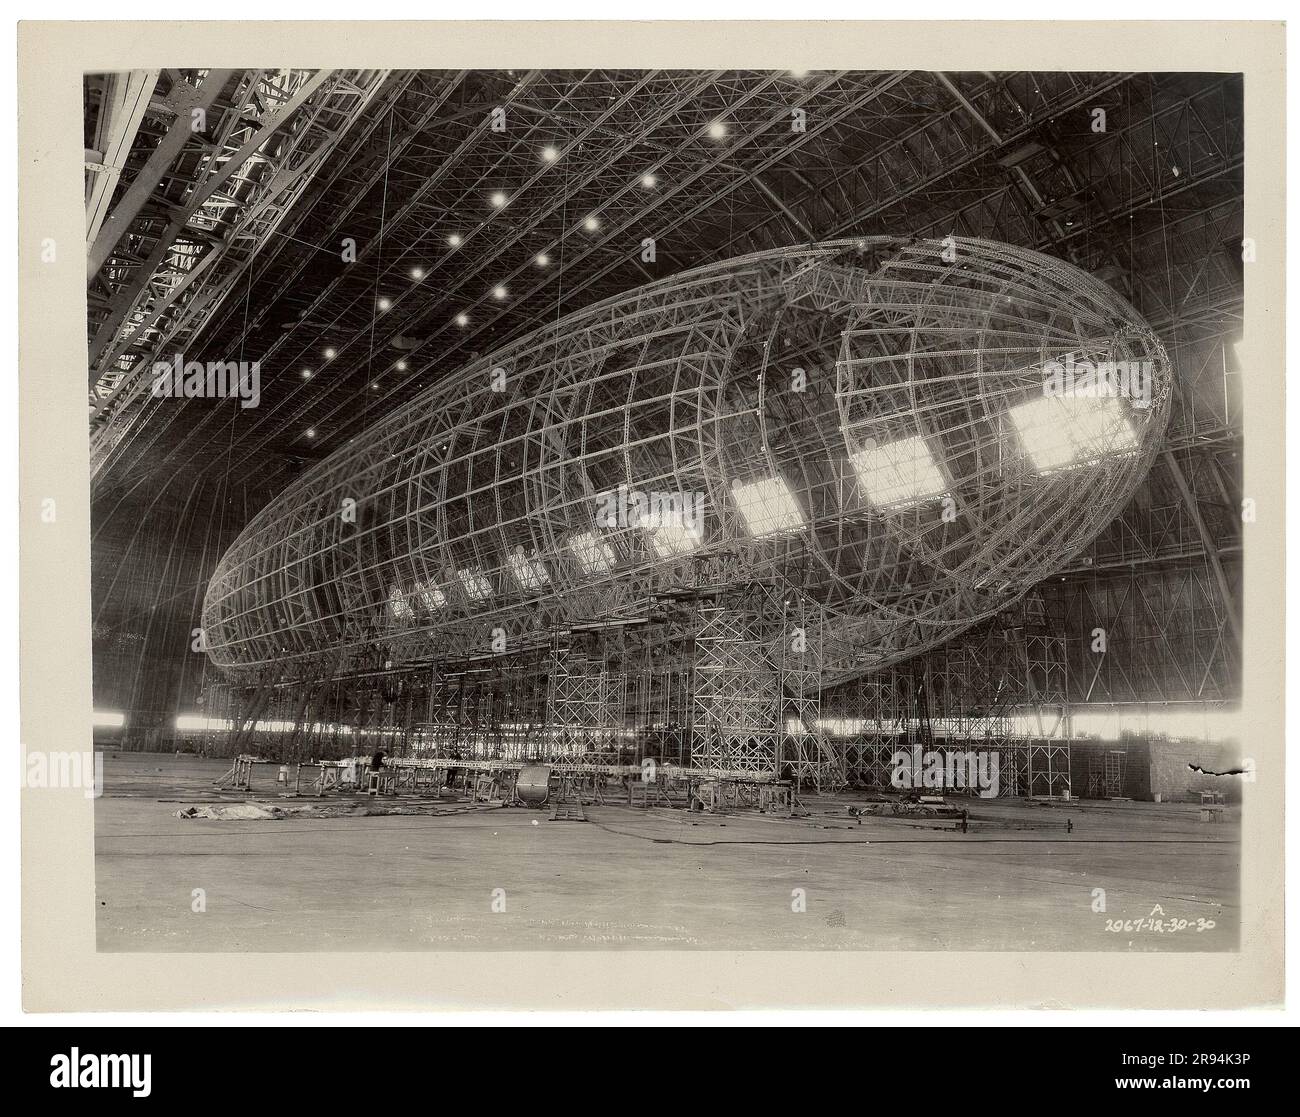 Nose section being attached to nearly completed framework. Original caption: Nose section being attached to USS Akron..Dirigible Disasters Stock Photo